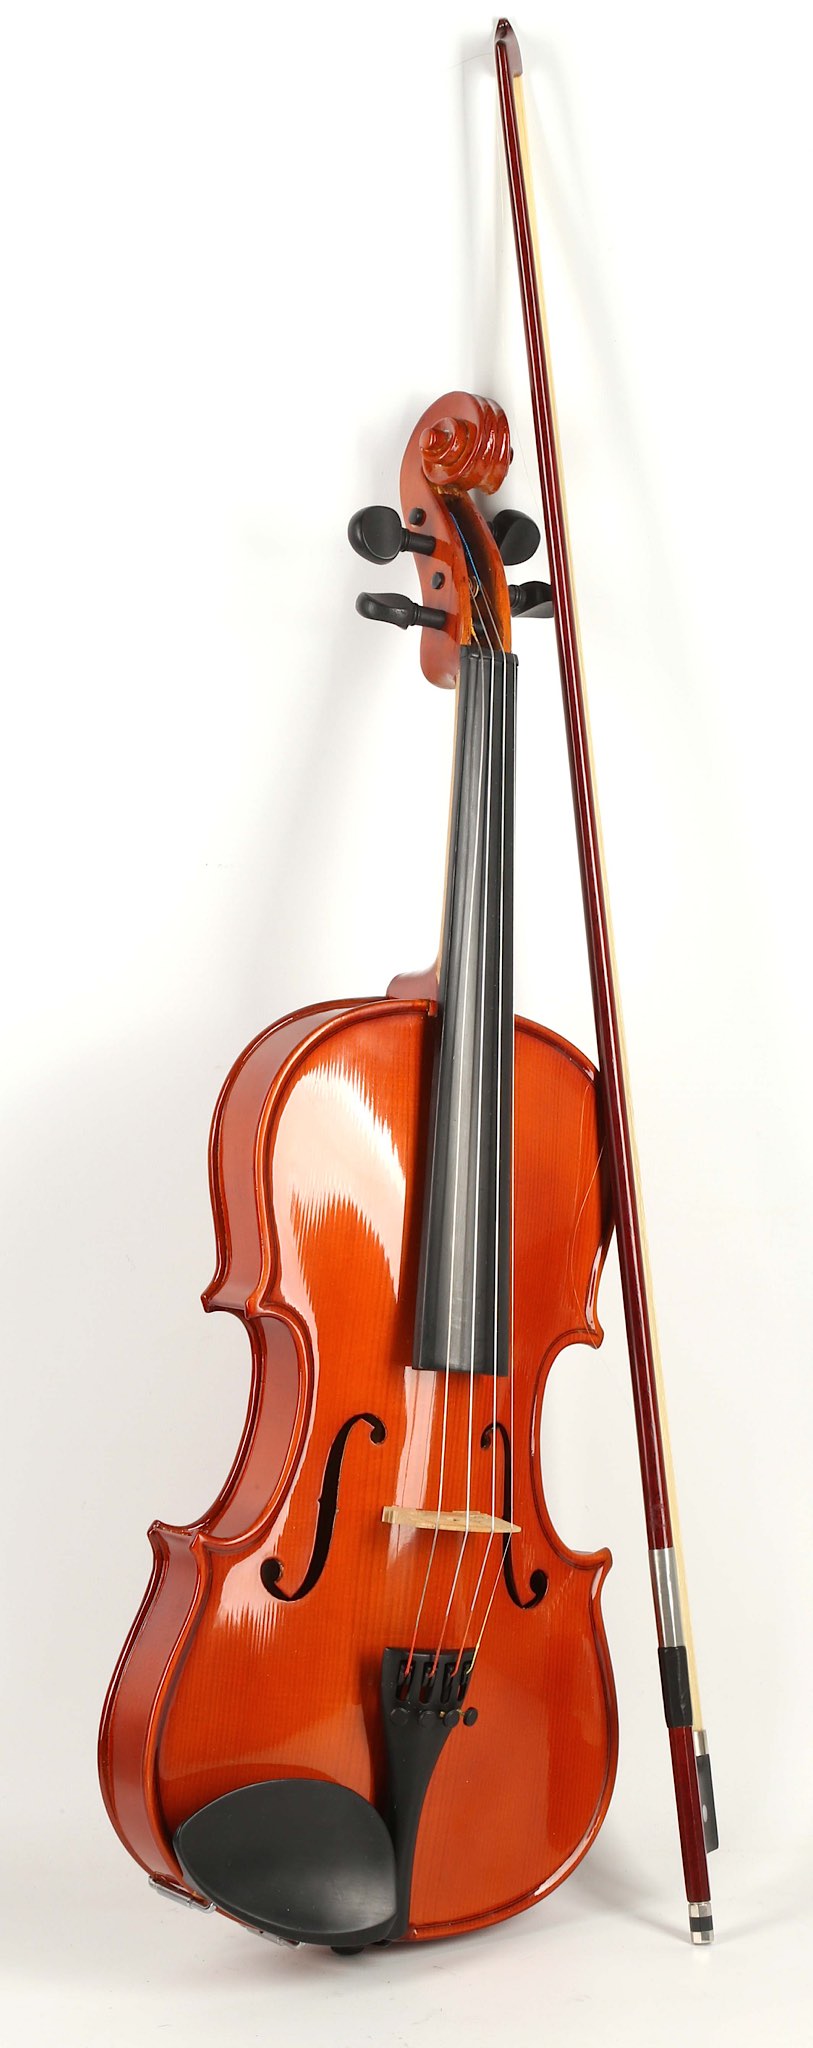 A Roling's full sized violin, cased with bow and extra strings